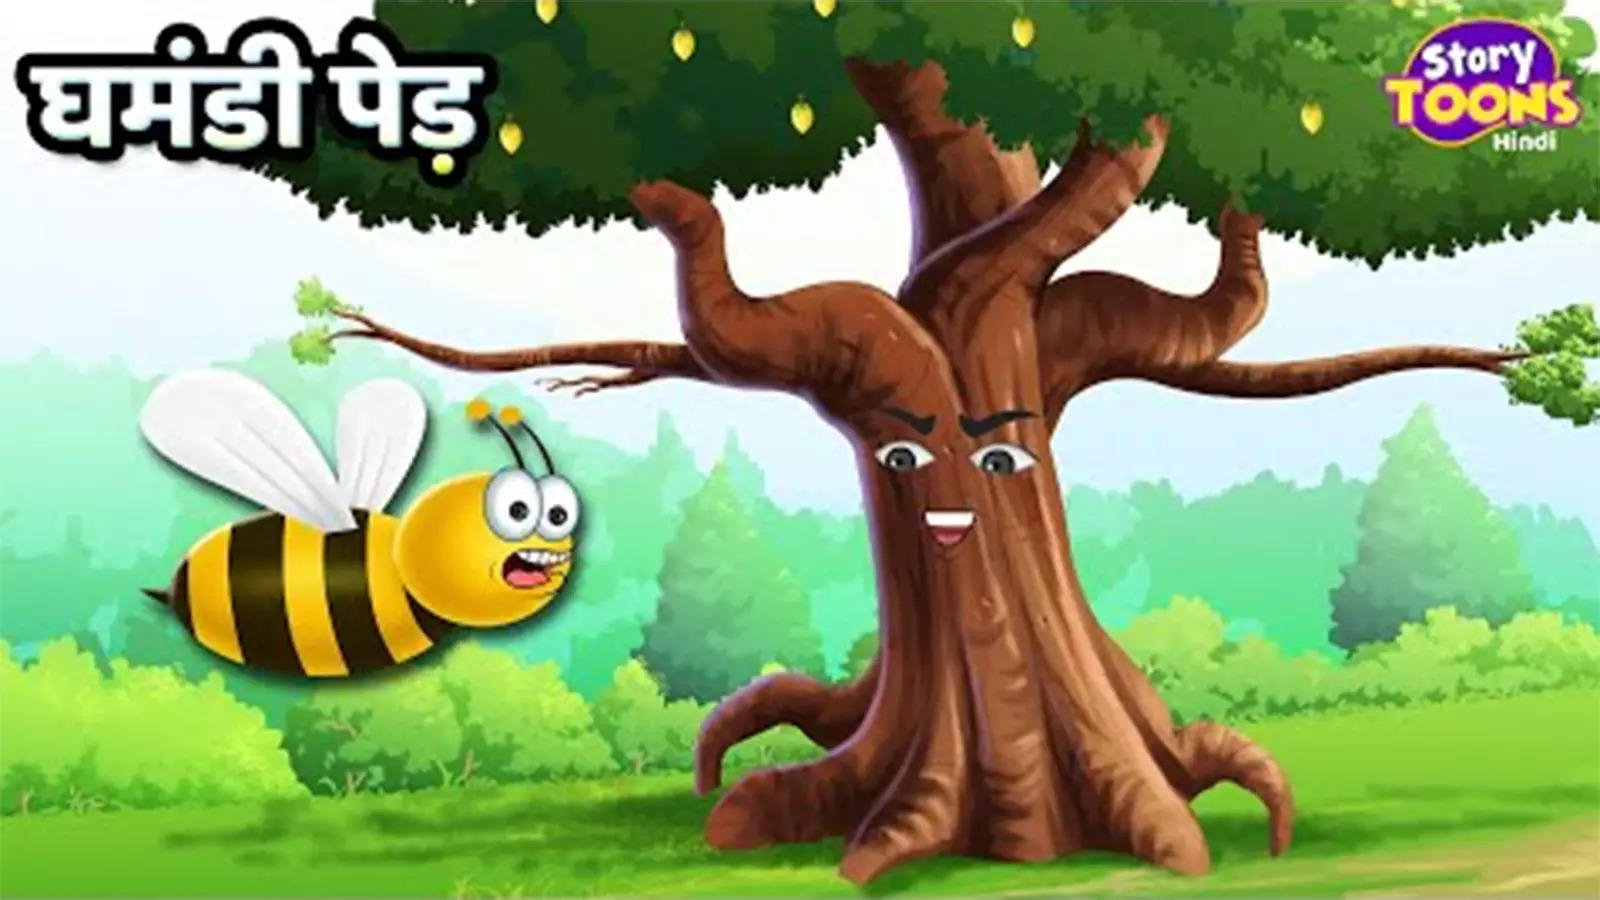 Watch Popular Children Hindi Story 'Ghamandi Ped' For Kids - Check Out  Kids's Nursery Rhymes And Baby Songs In Hindi | Entertainment - Times of  India Videos